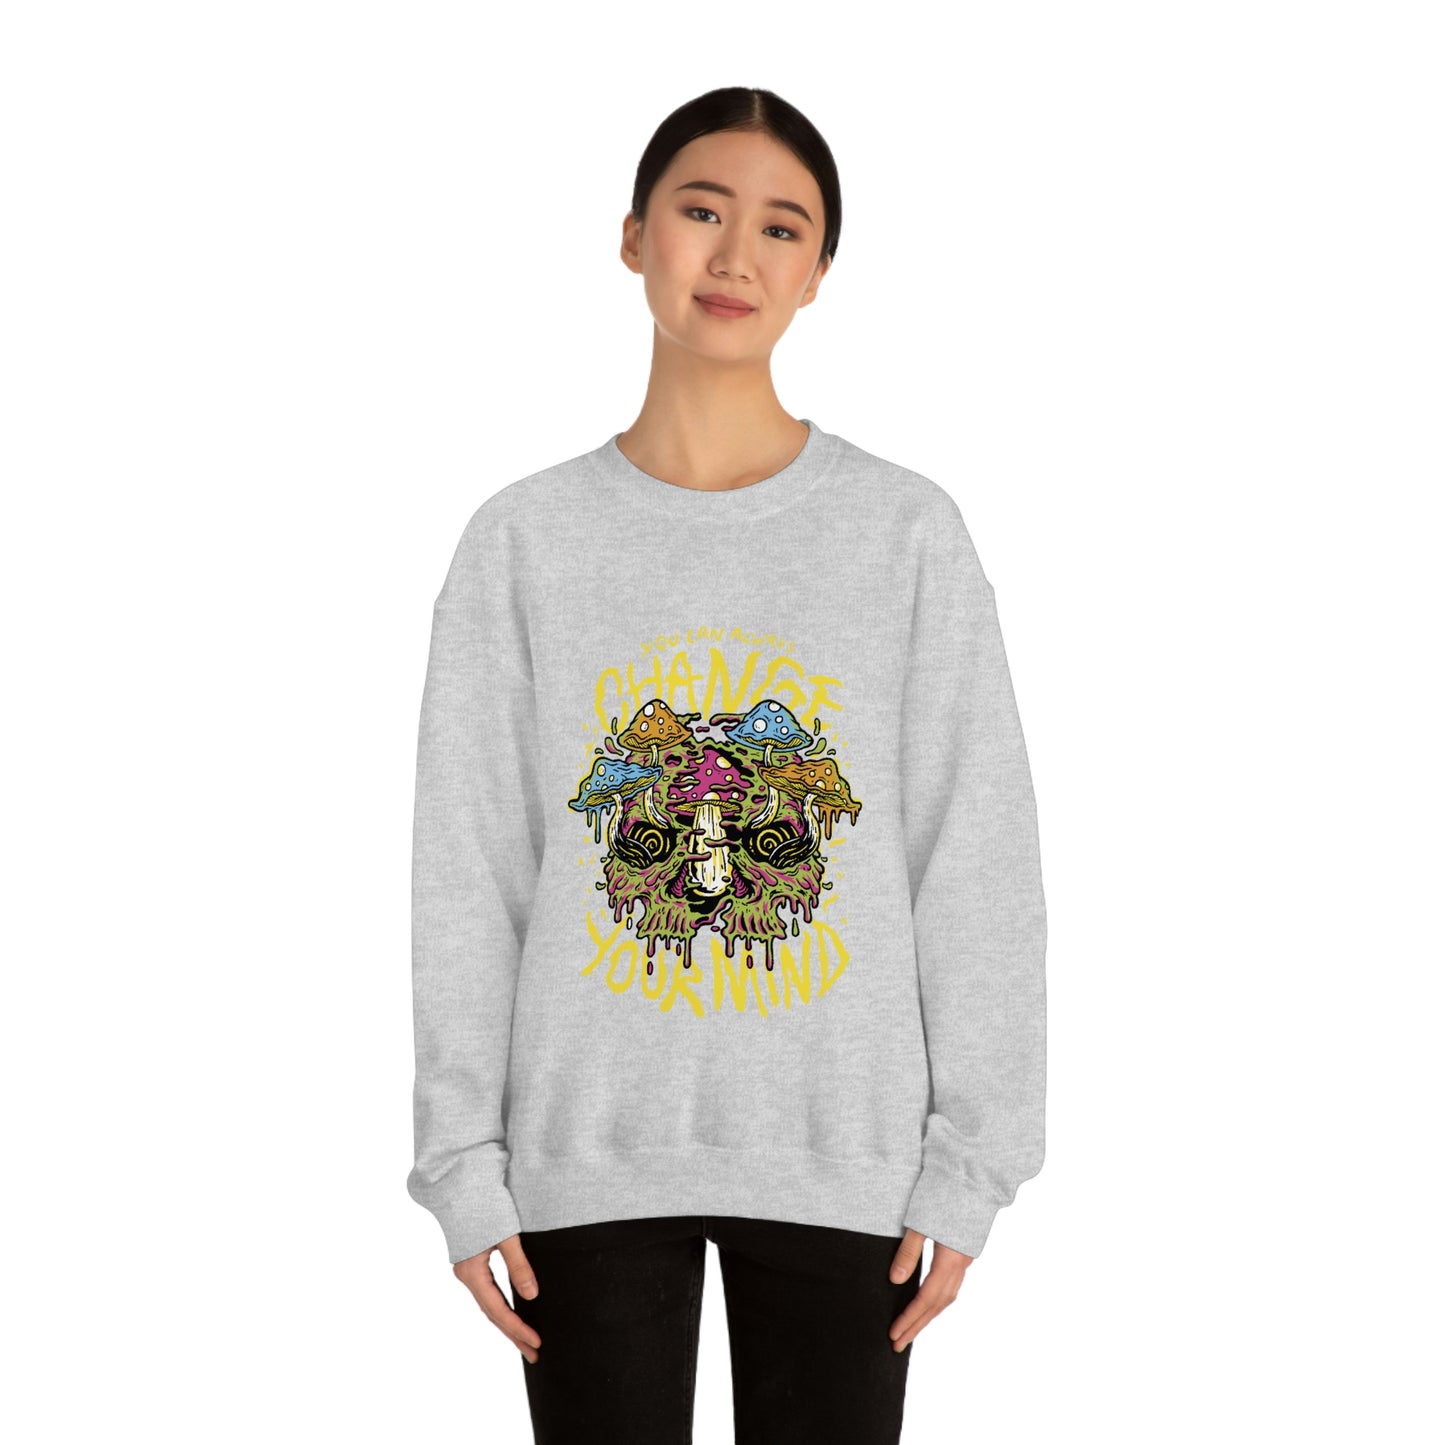 Cottagecore You Can ALways Change Your Mind Psychedelic Sweatshirt